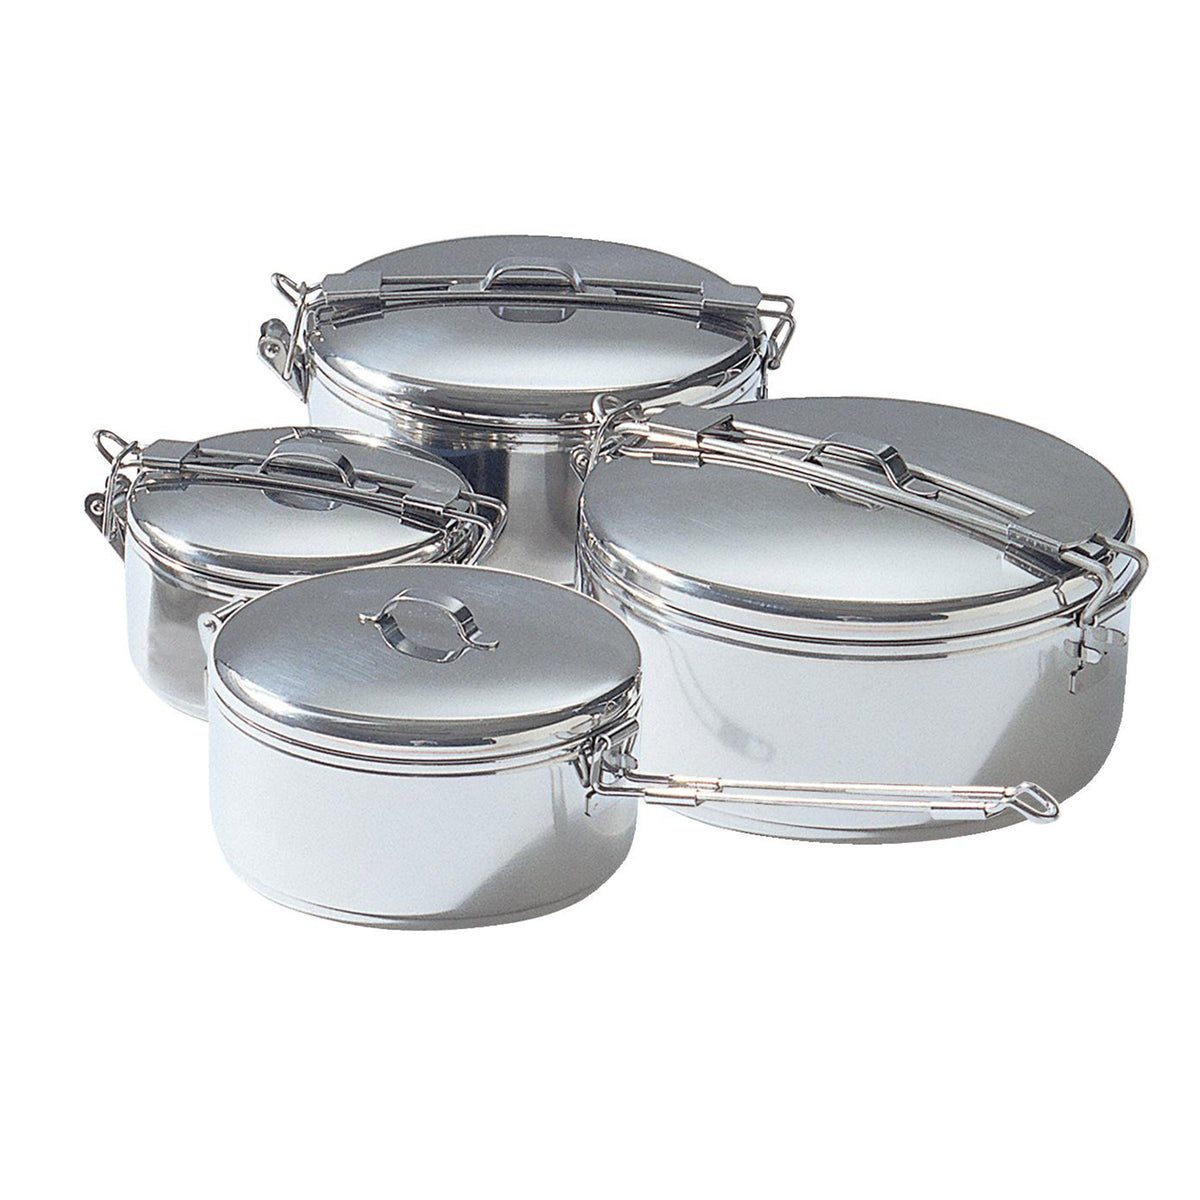 stowaway pot collection showing all four sizes